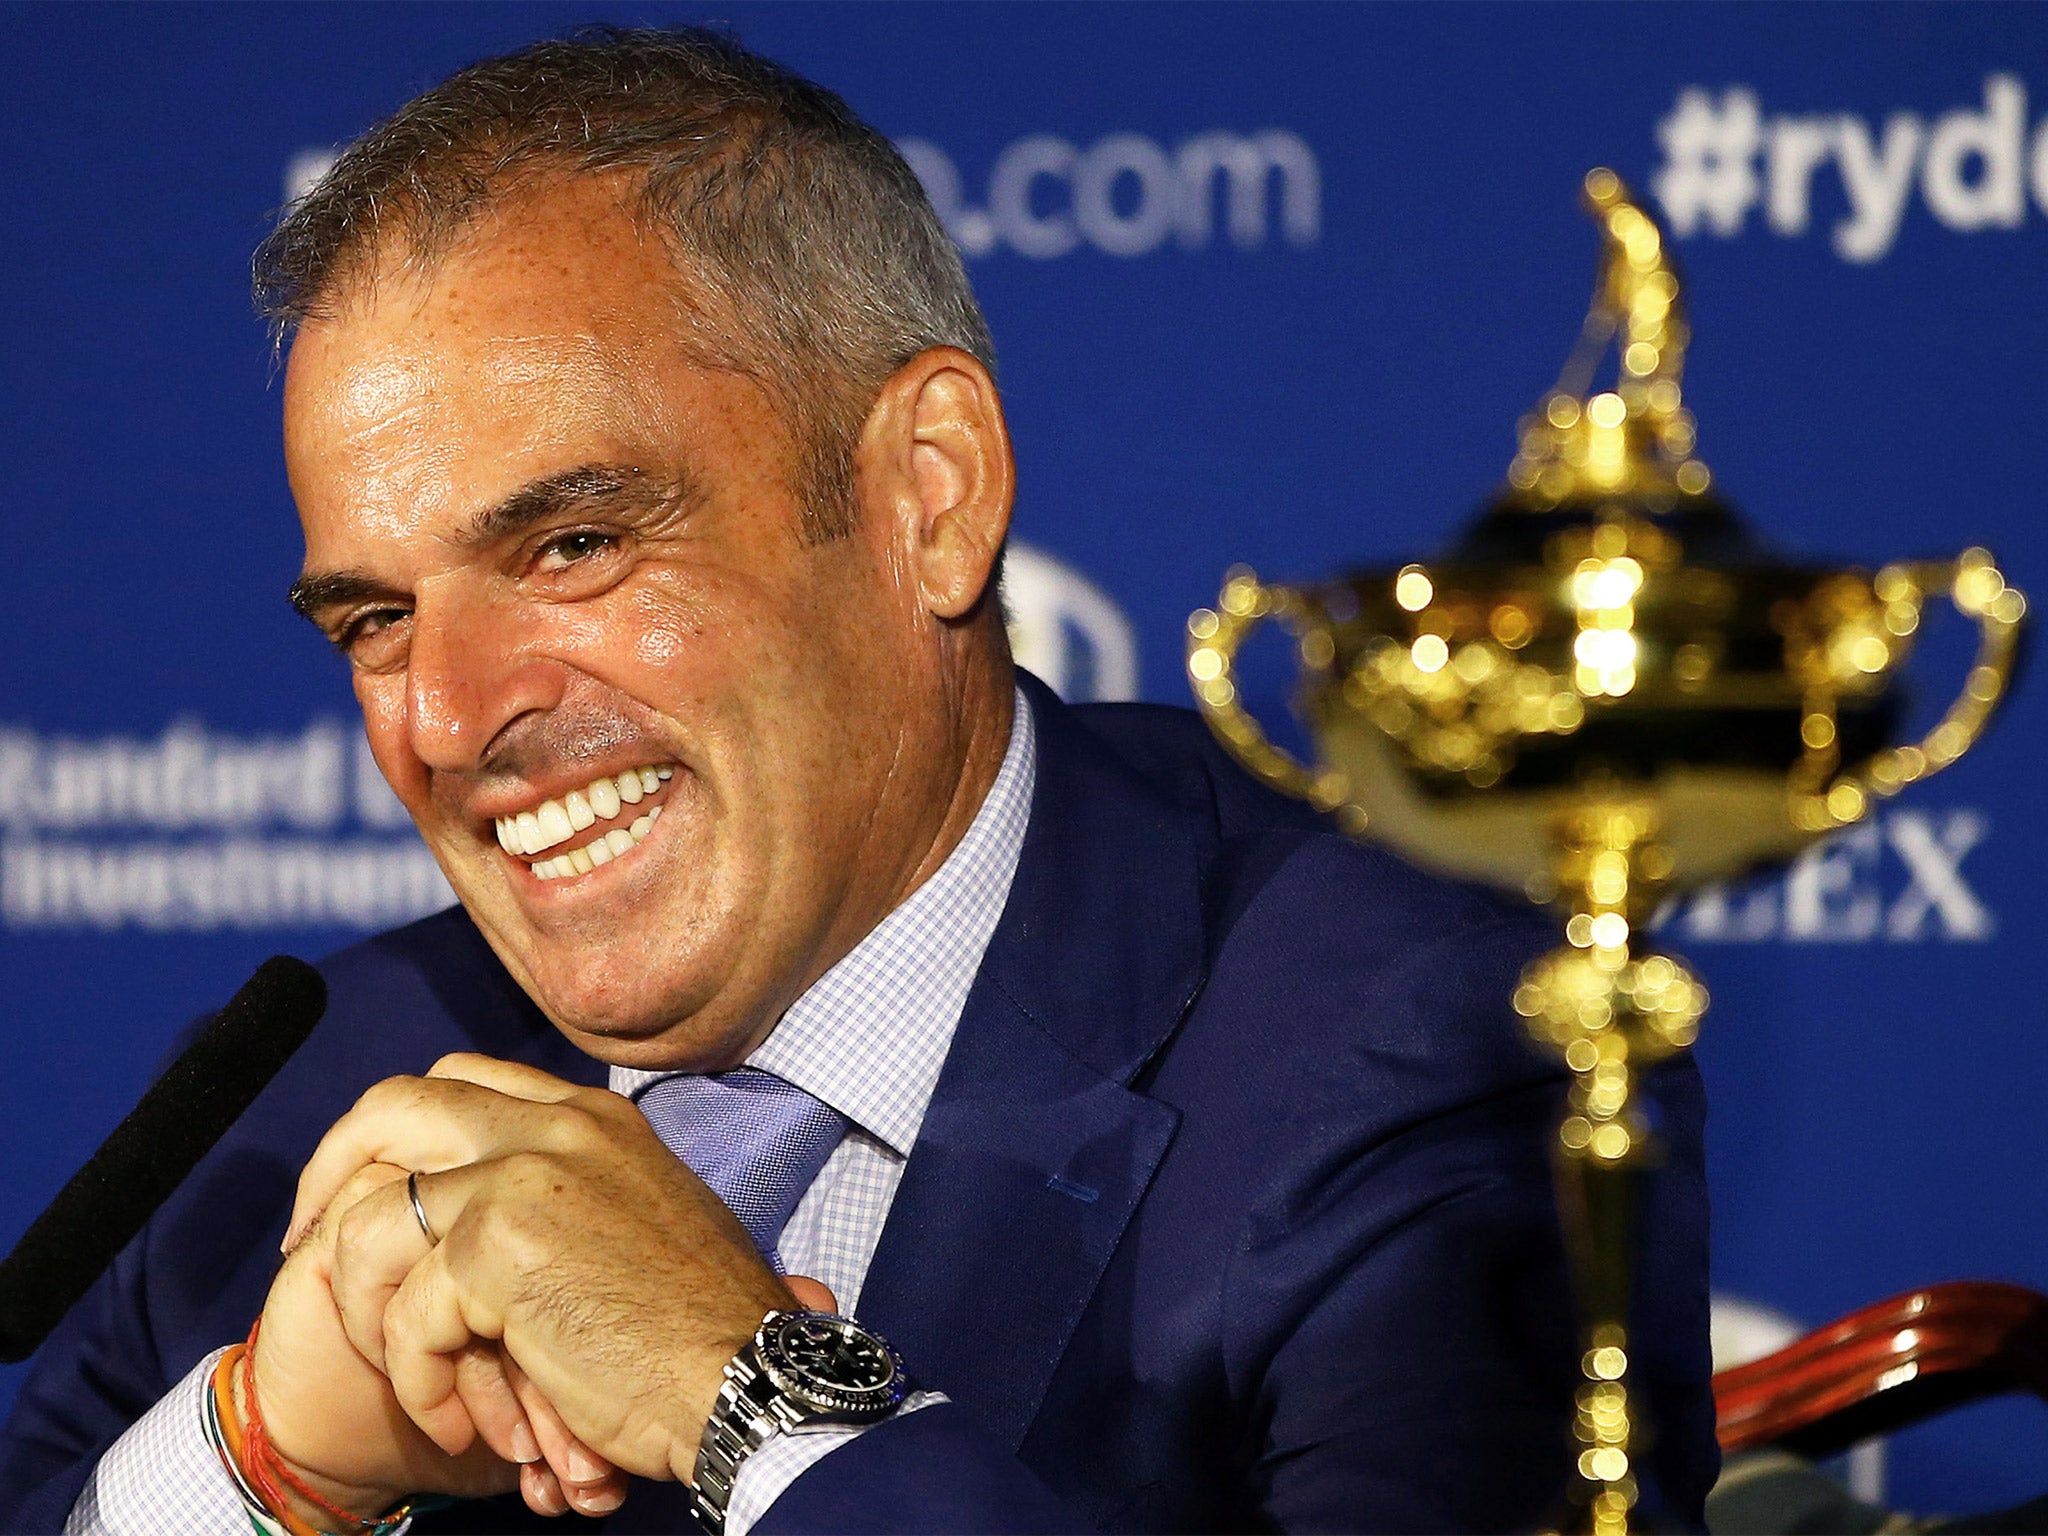 Paul McGinley reveals his wild card picks of Stephen Gallacher, Lee Westwood and Ian Poulter